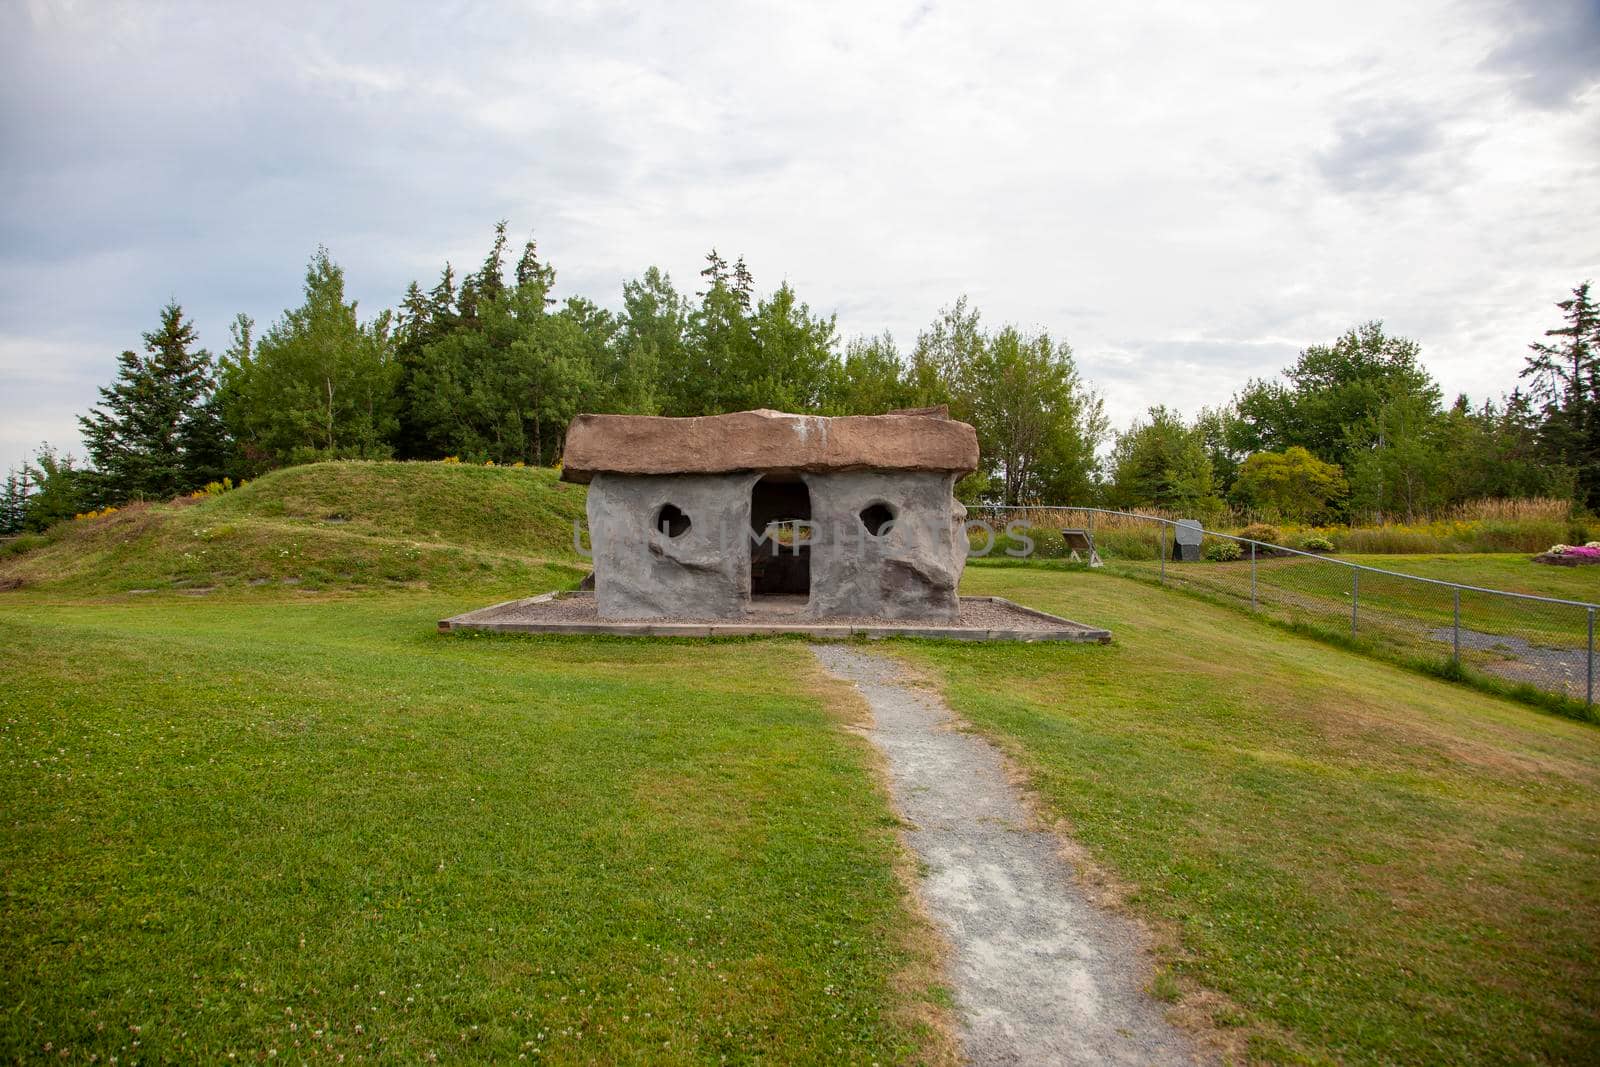 August 18, 2019 - Stewiacke, Nova Scotia - A small stone house in the style of the Flintstones at a local stopping place in Stewiakce 